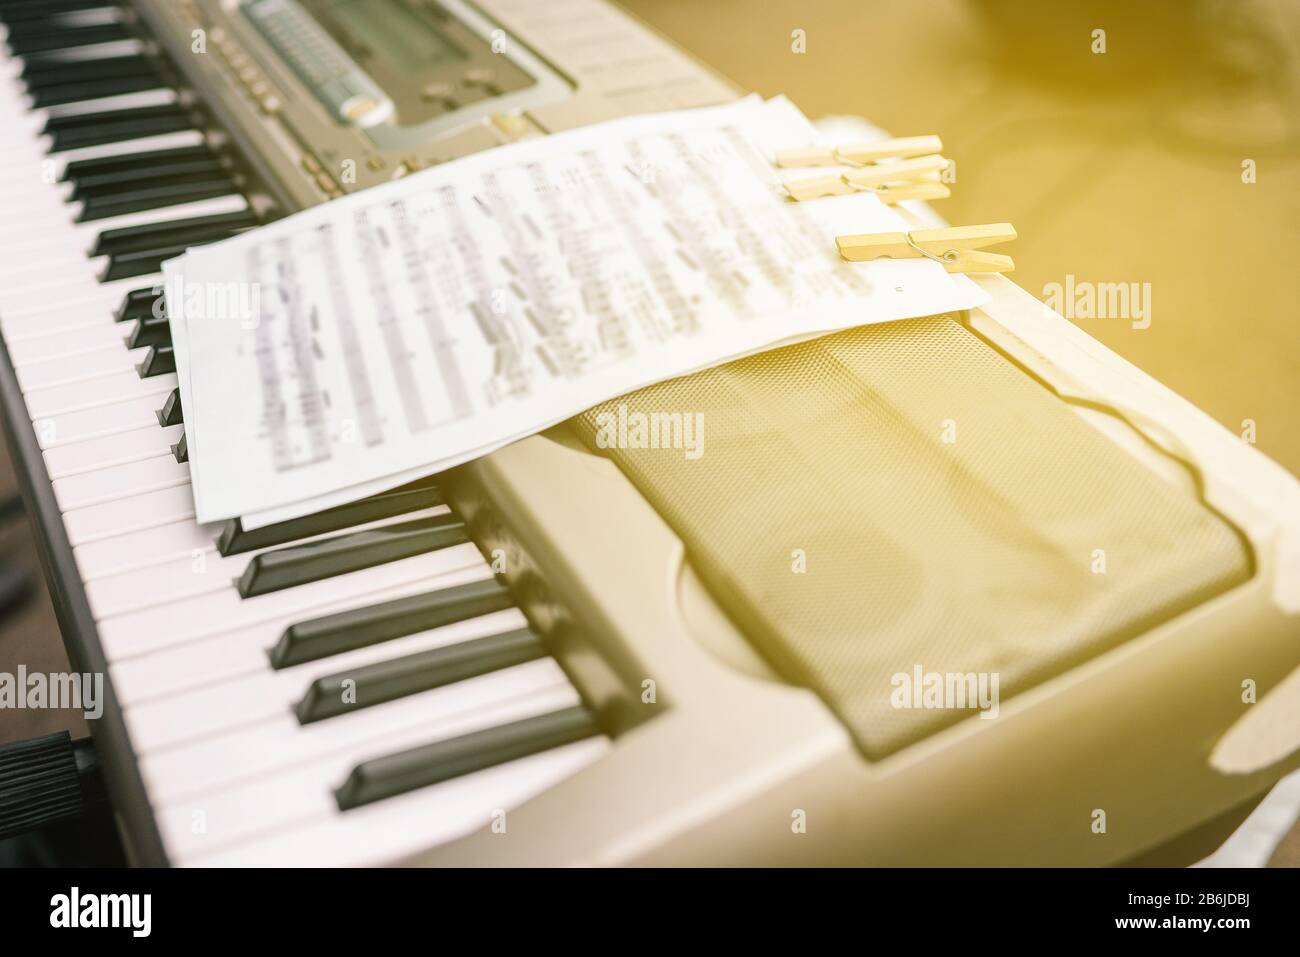 Musical synthesizer with a white sheet of paper with written notes. Street concert of musicians. Electronic keyboard musical instrument Stock Photo